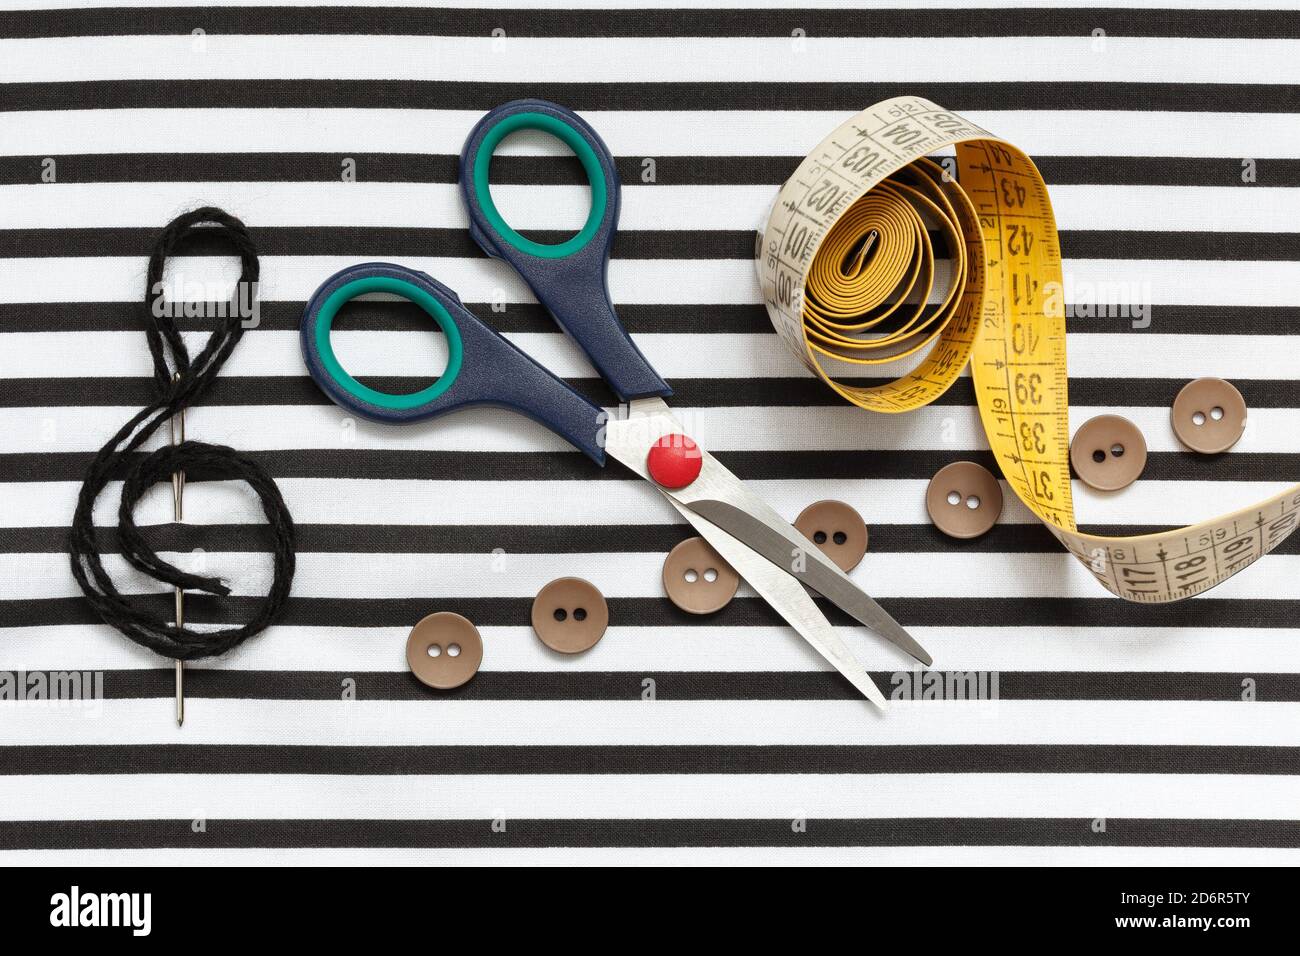 Scissors, measuring tape, needle, threads and buttons in the form of notes on striped fabric. Stock Photo